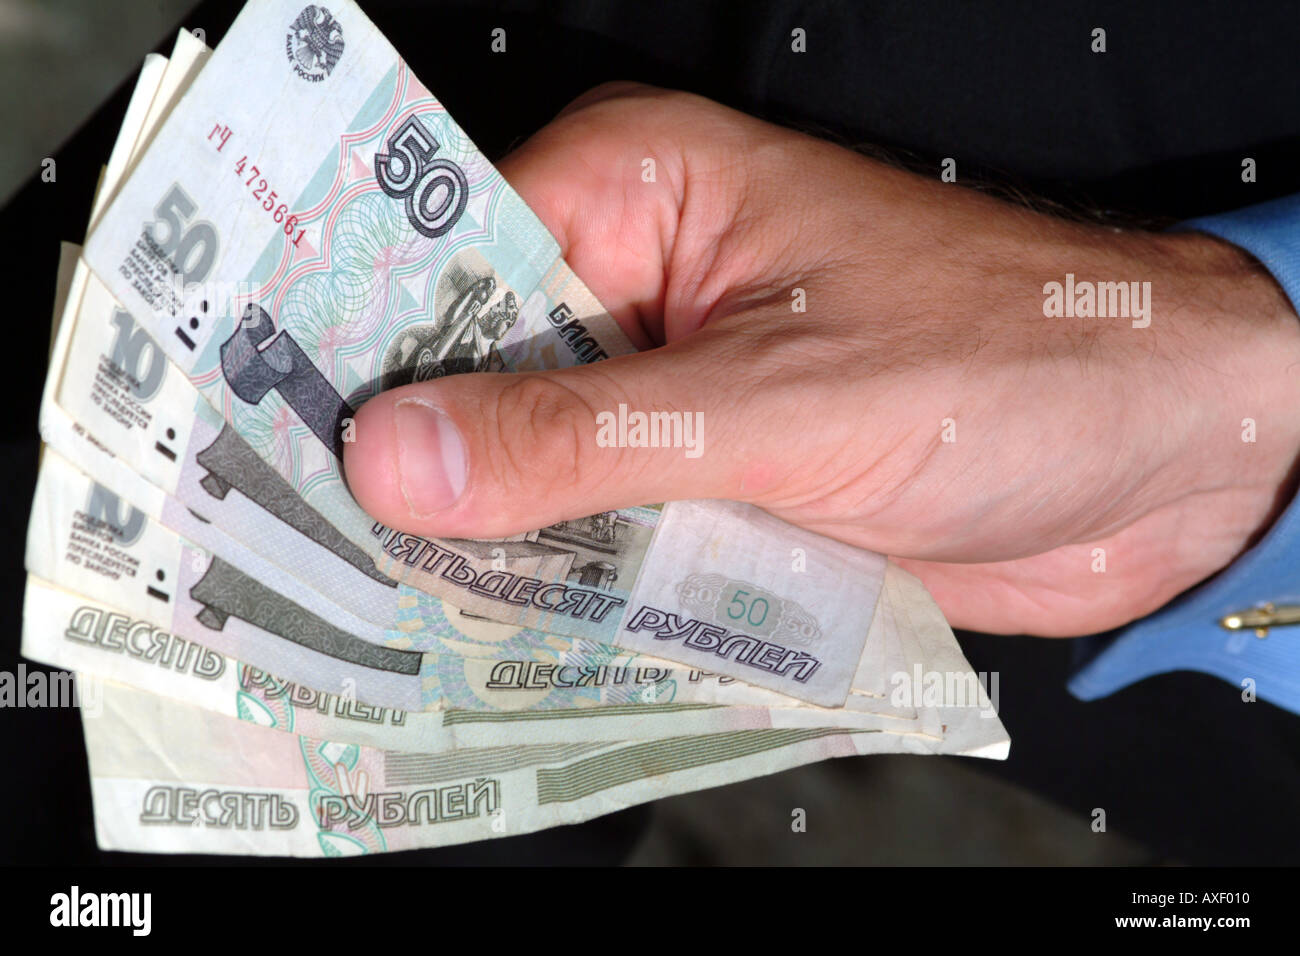 Handful of Roubles Ruble Russia Currency fistfull Stock Photo